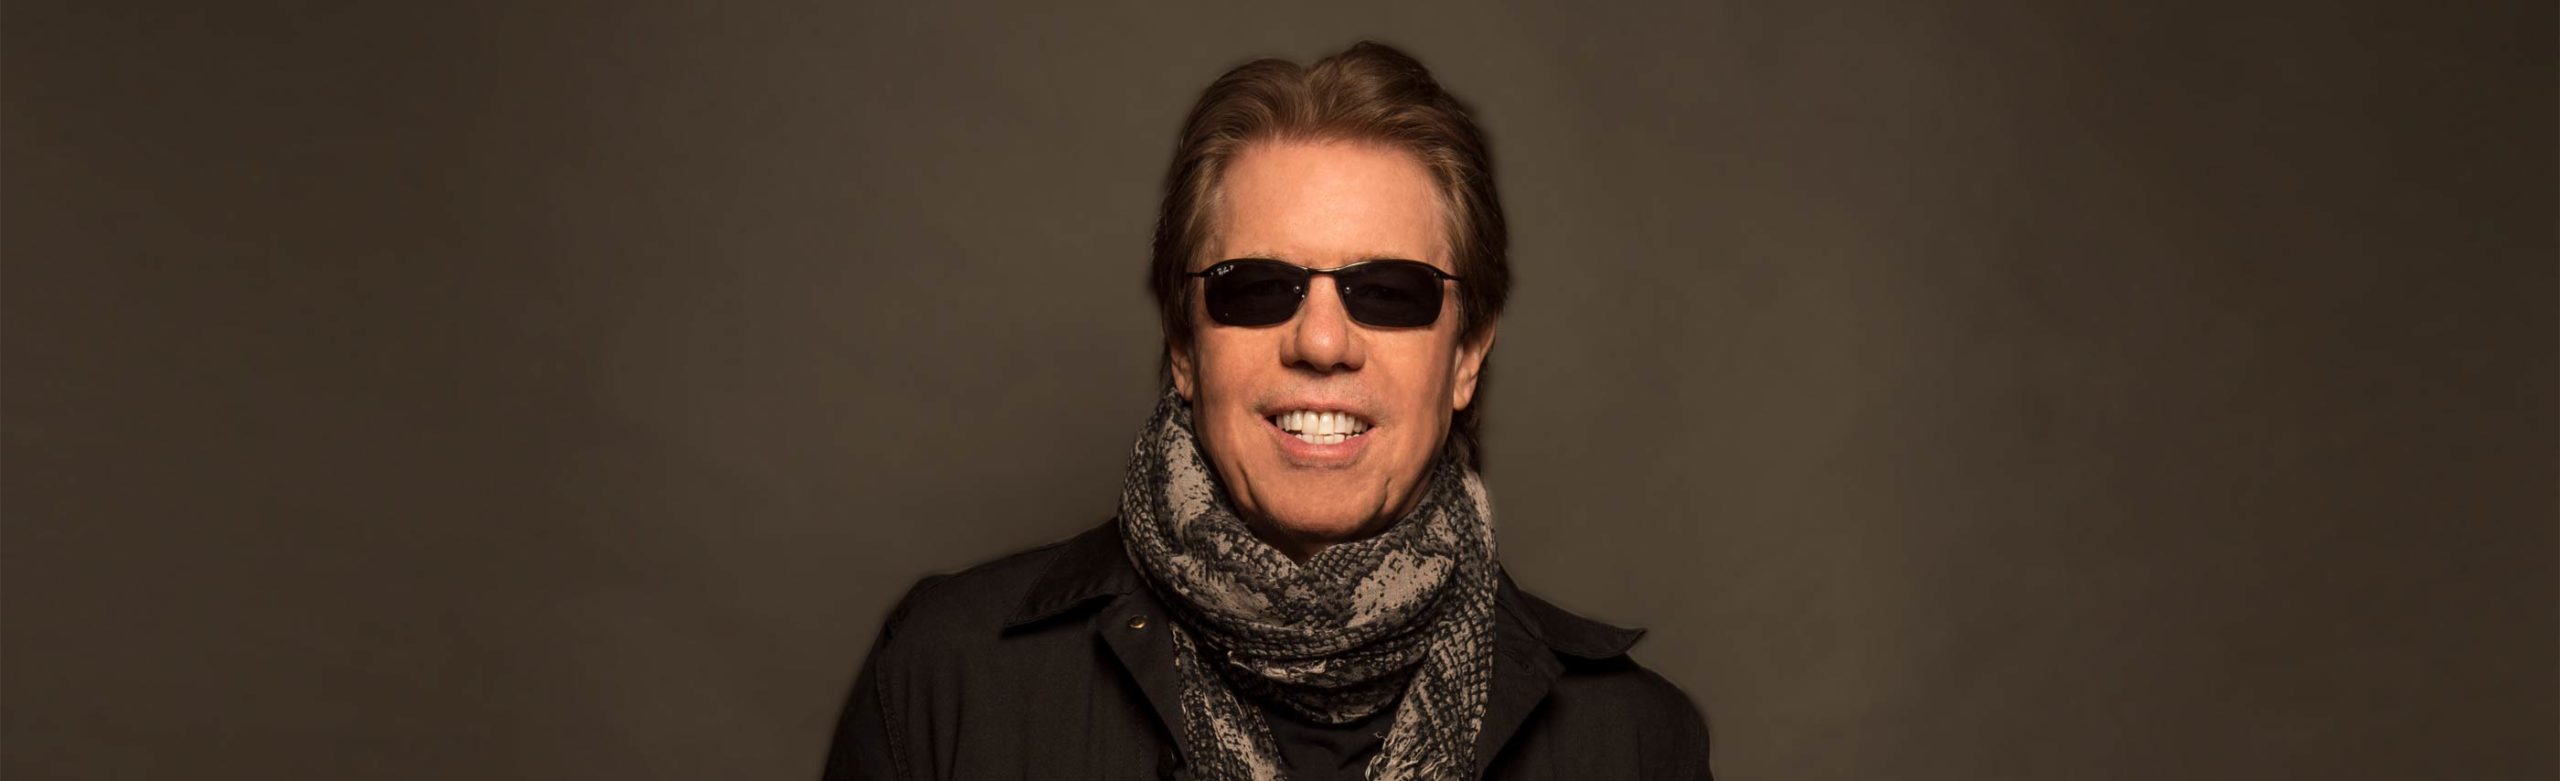 CANCELED: George Thorogood & The Destroyers